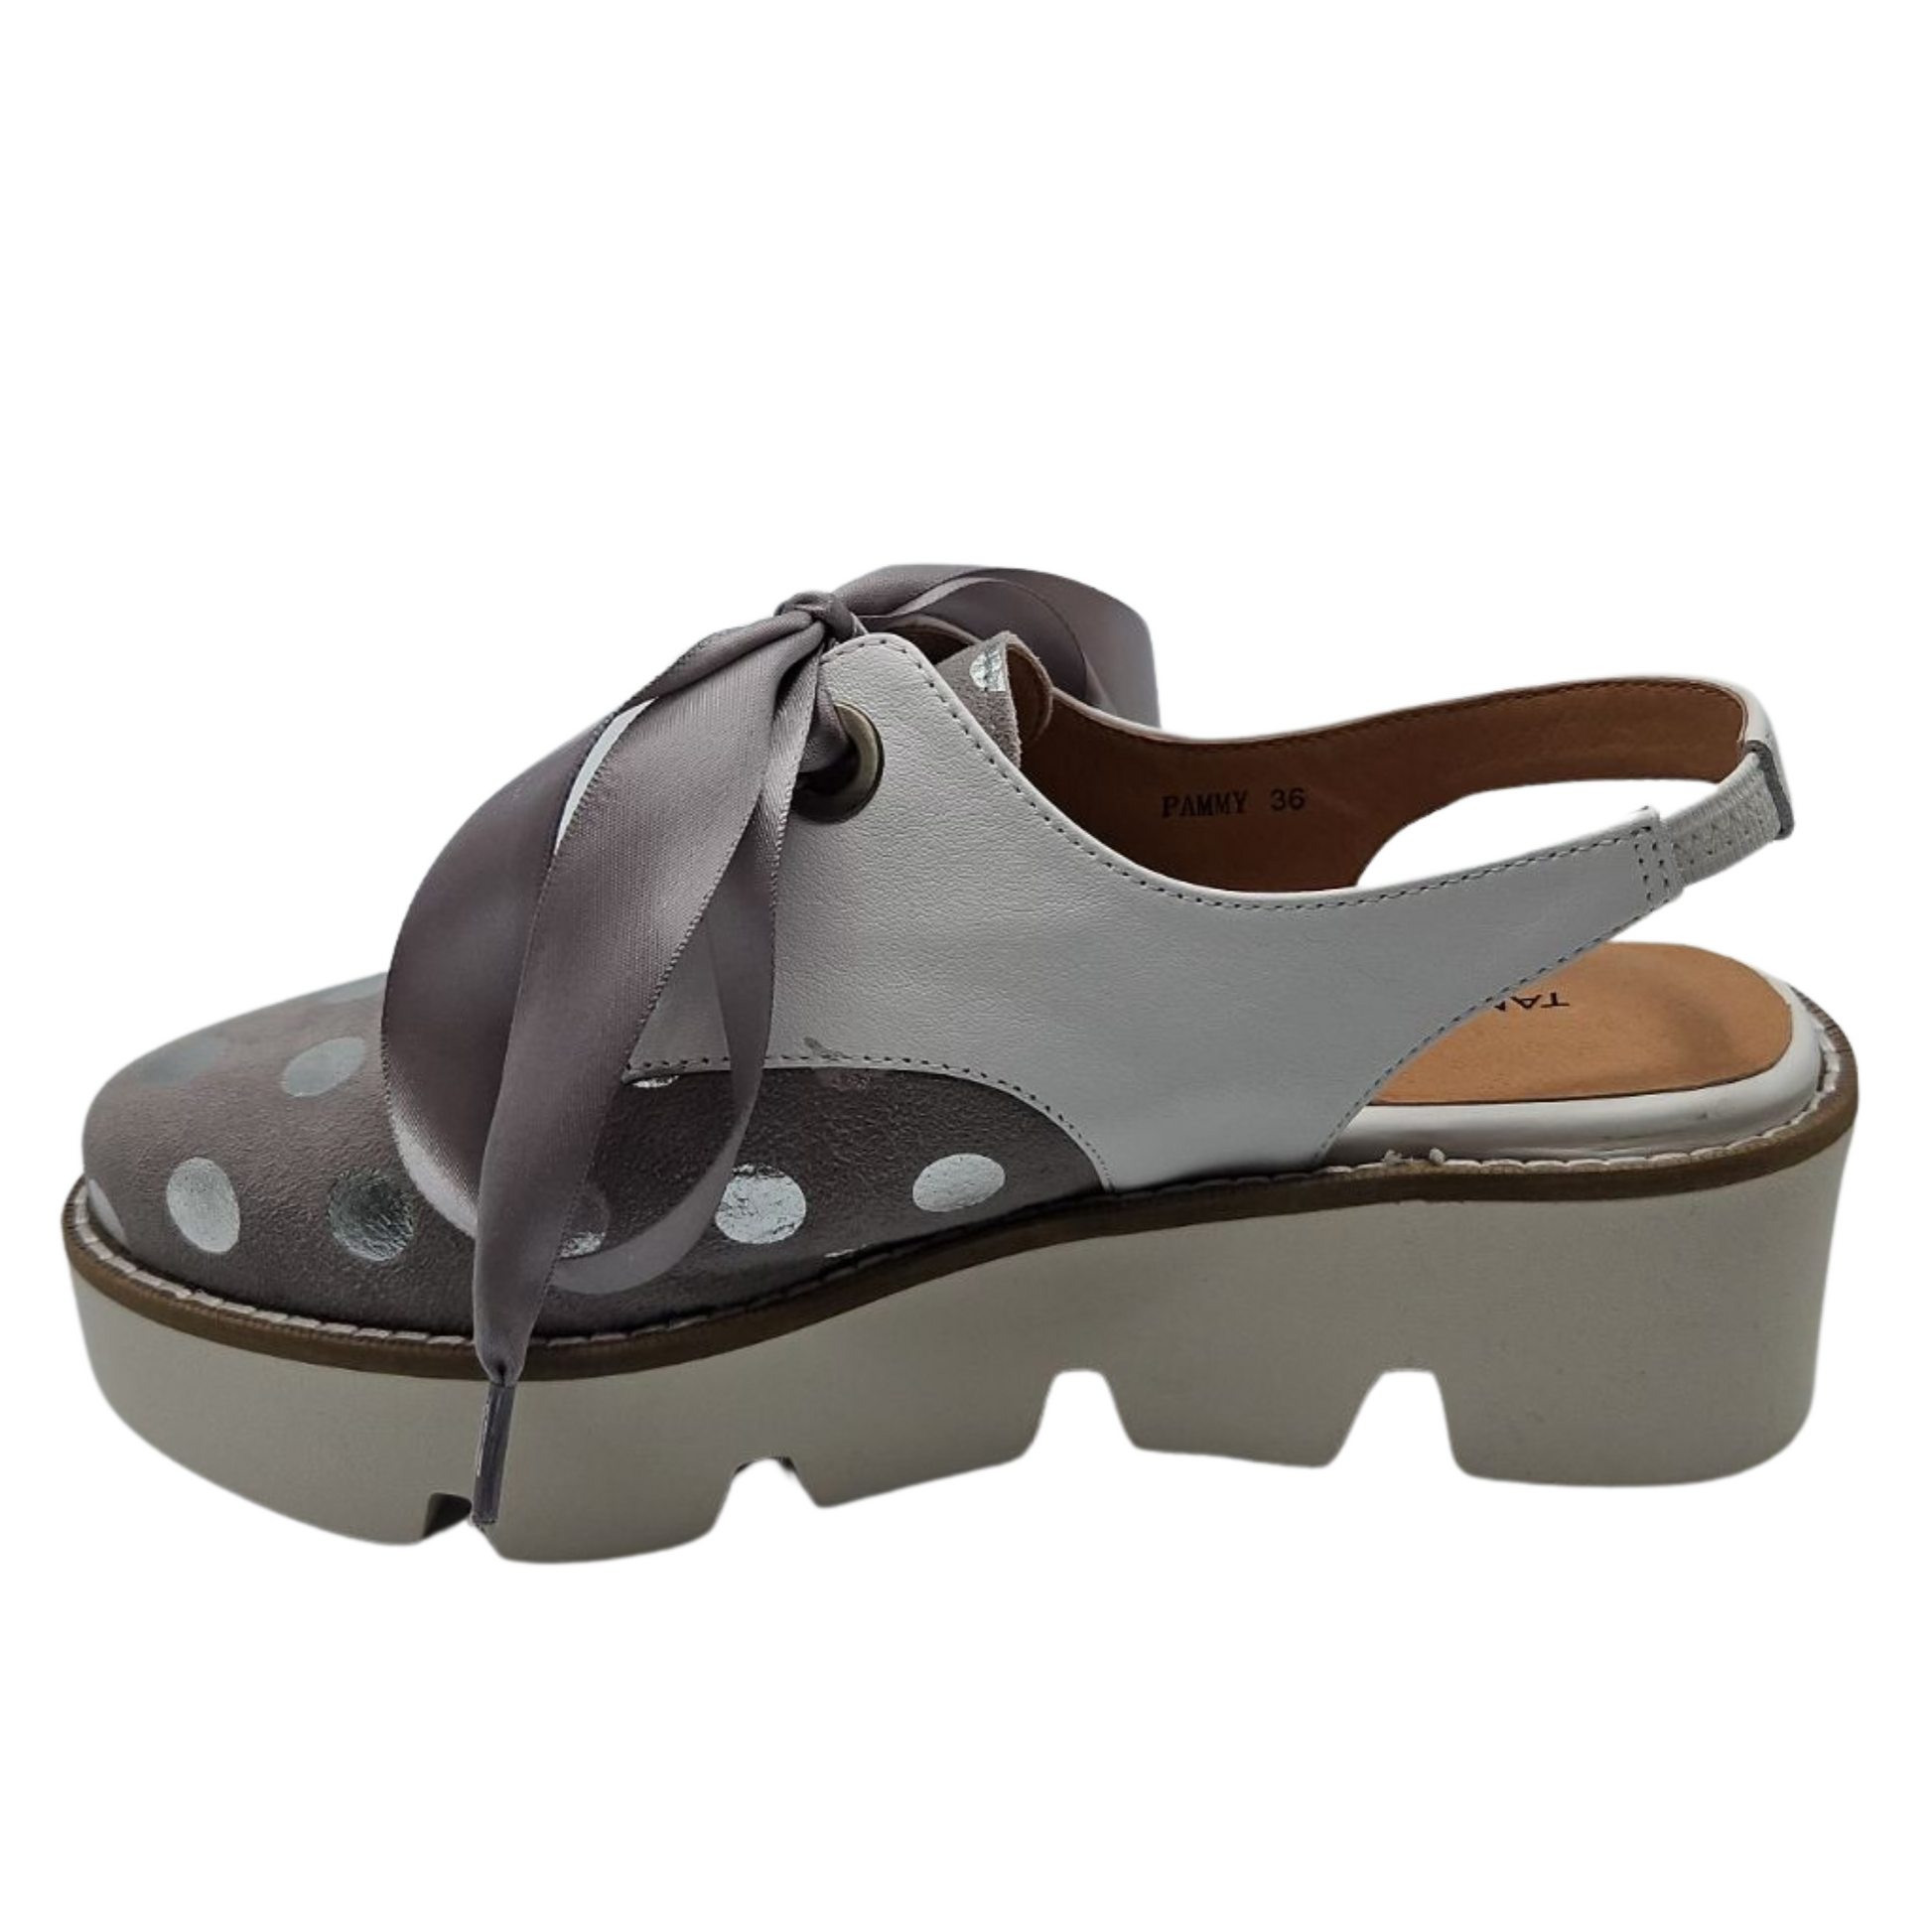 Left facing view of dove grey suede oxfords with shiny silver polka dots. Featuring satin ribbon laces, slingback strap and chunky white platform sole.